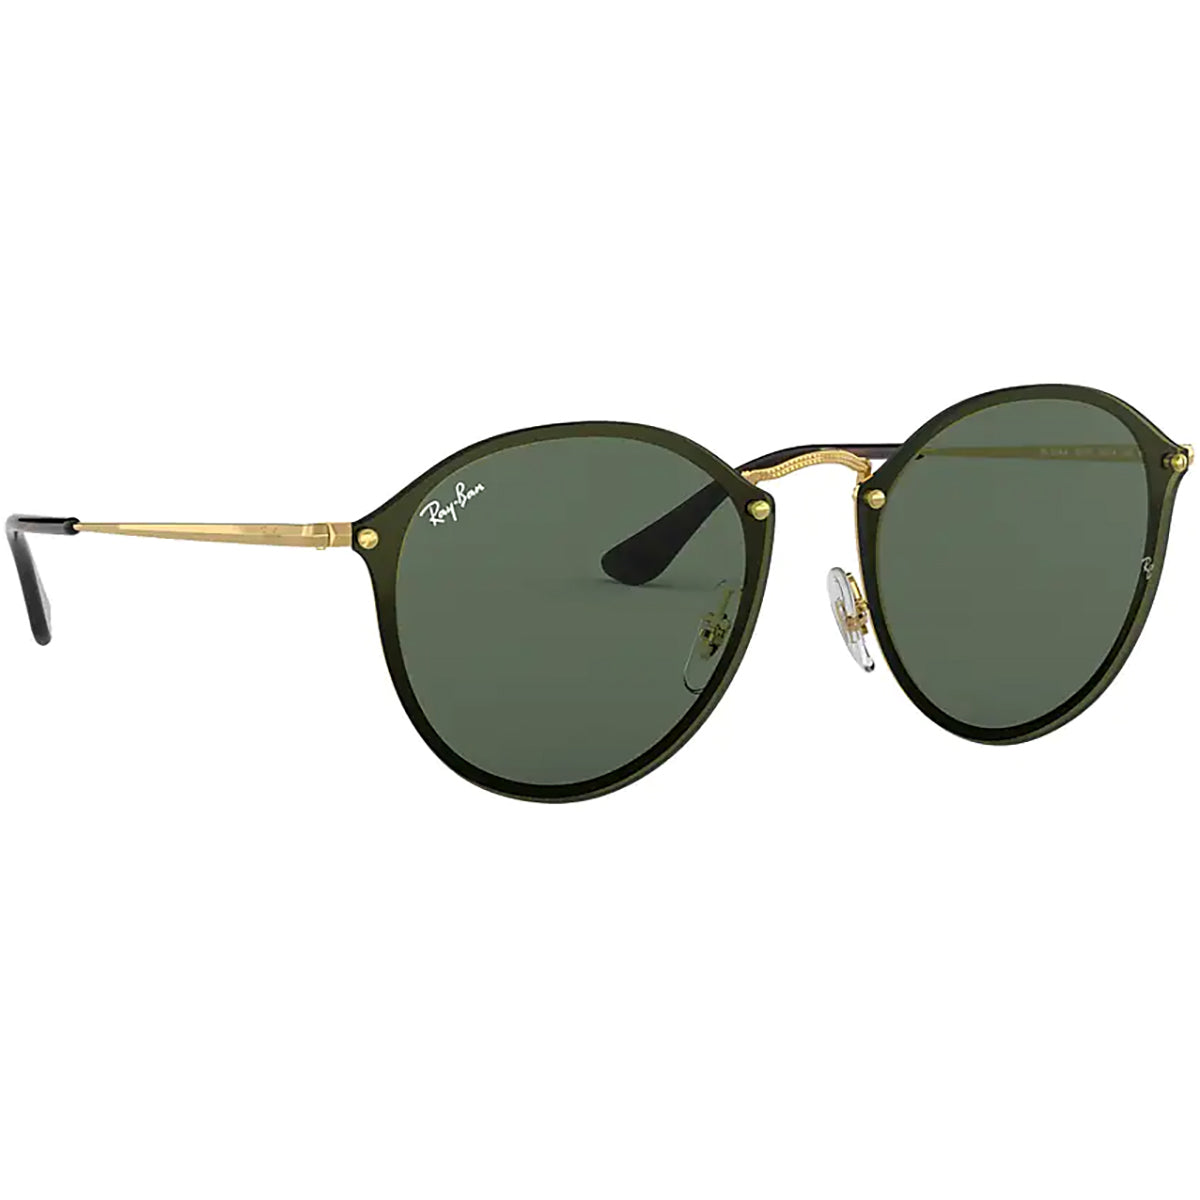 Ray-Ban Blaze Round Adult Wireframe Sunglasses-0RB3574N